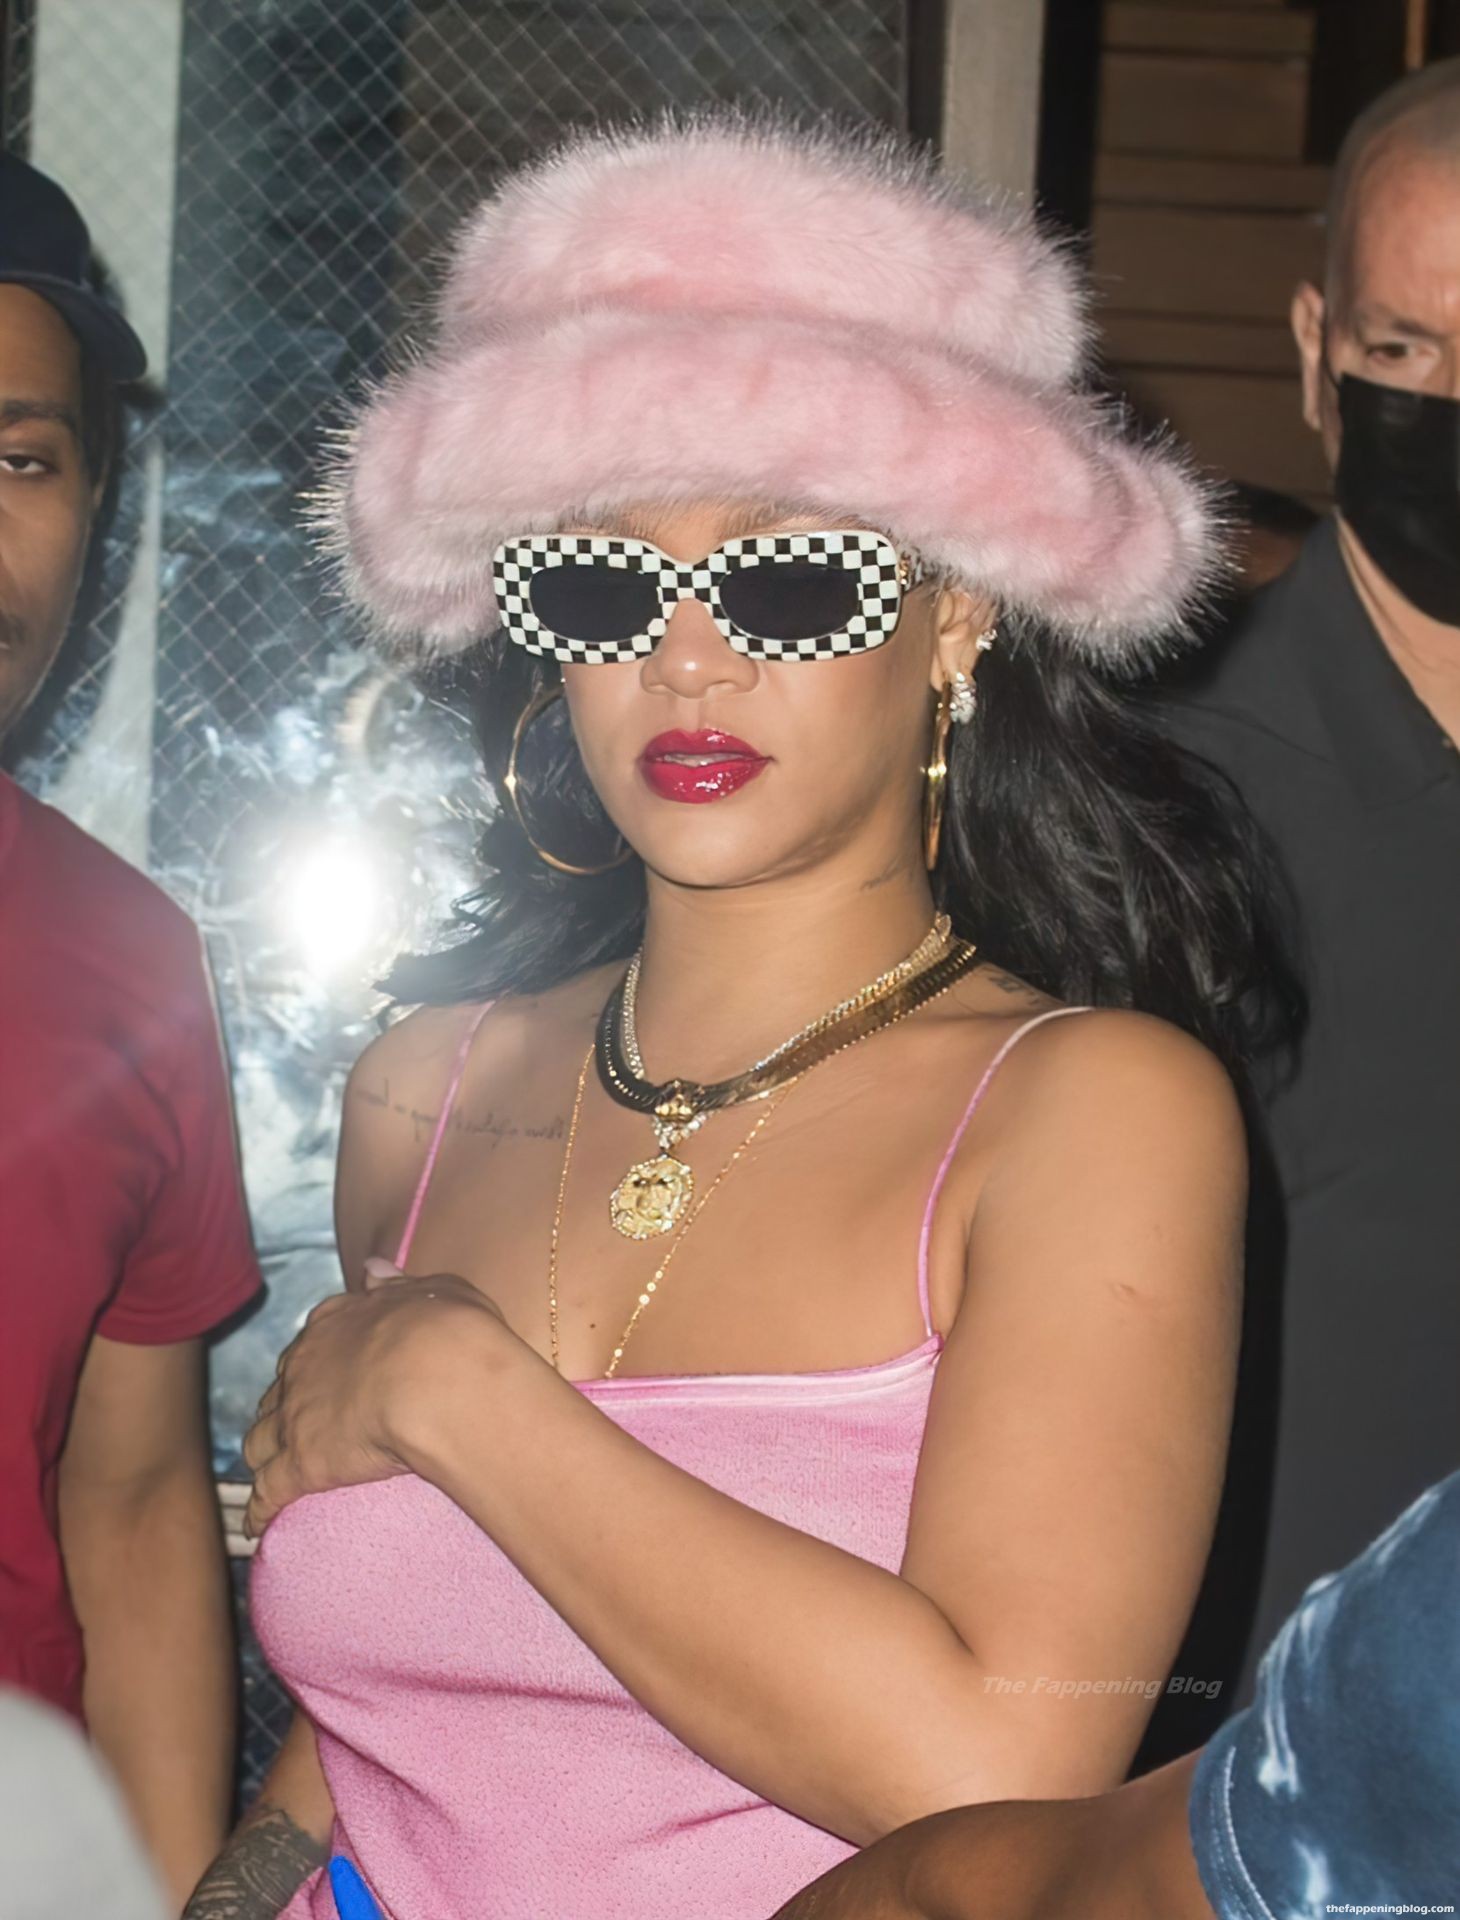 Rihanna is Seen Braless in NYC (26 Photos)